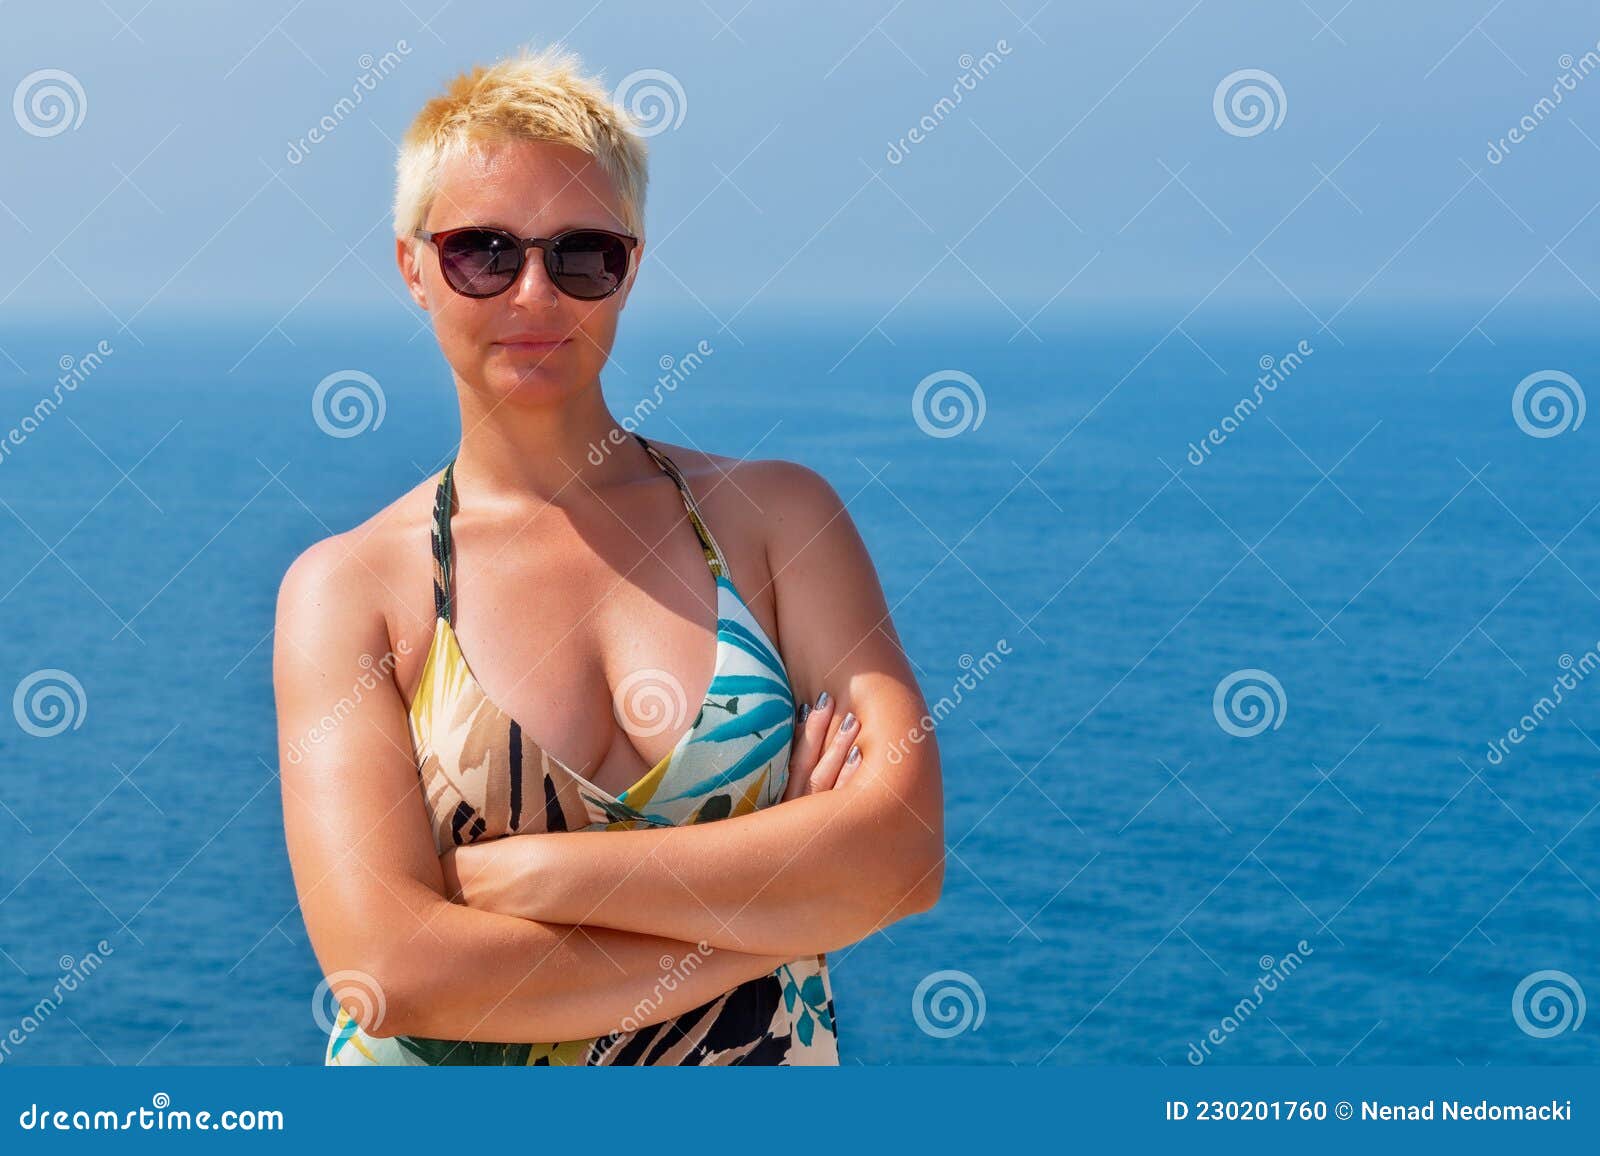 1. Short Blonde Hair with Sunglasses - wide 5